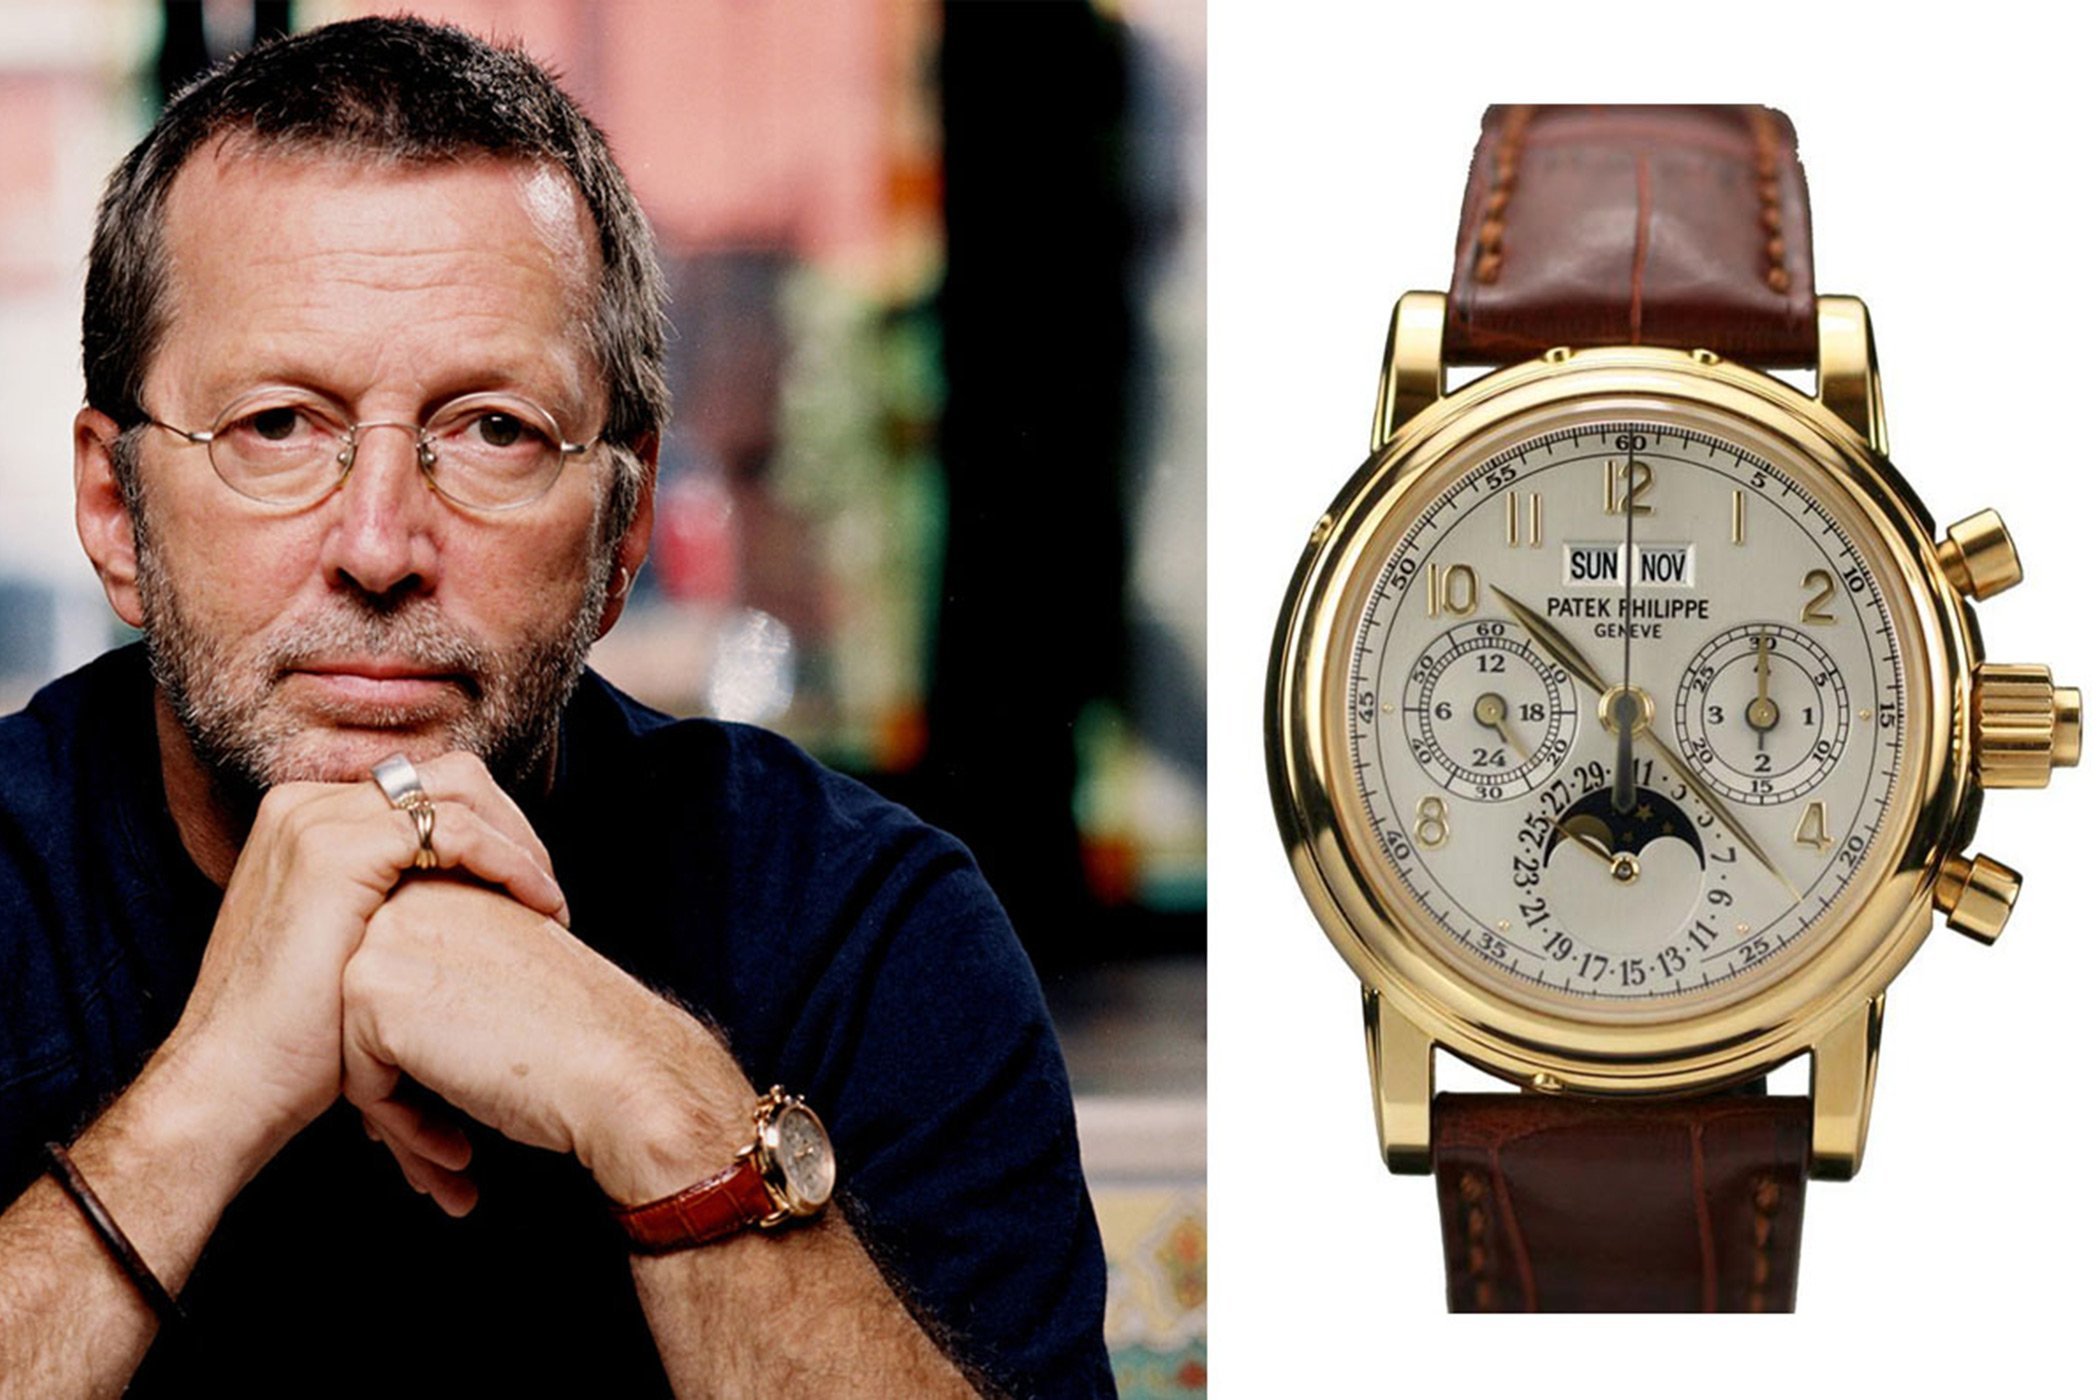 Billionaire Lifestyle - Eric Clapton is selling one of the finest of his  watches, an ultra rare platinum-cased Patek Philippe (reference 2499/100P)  Perpetual Calendar Chronograph. Launched in 1951, reference 2499 was in